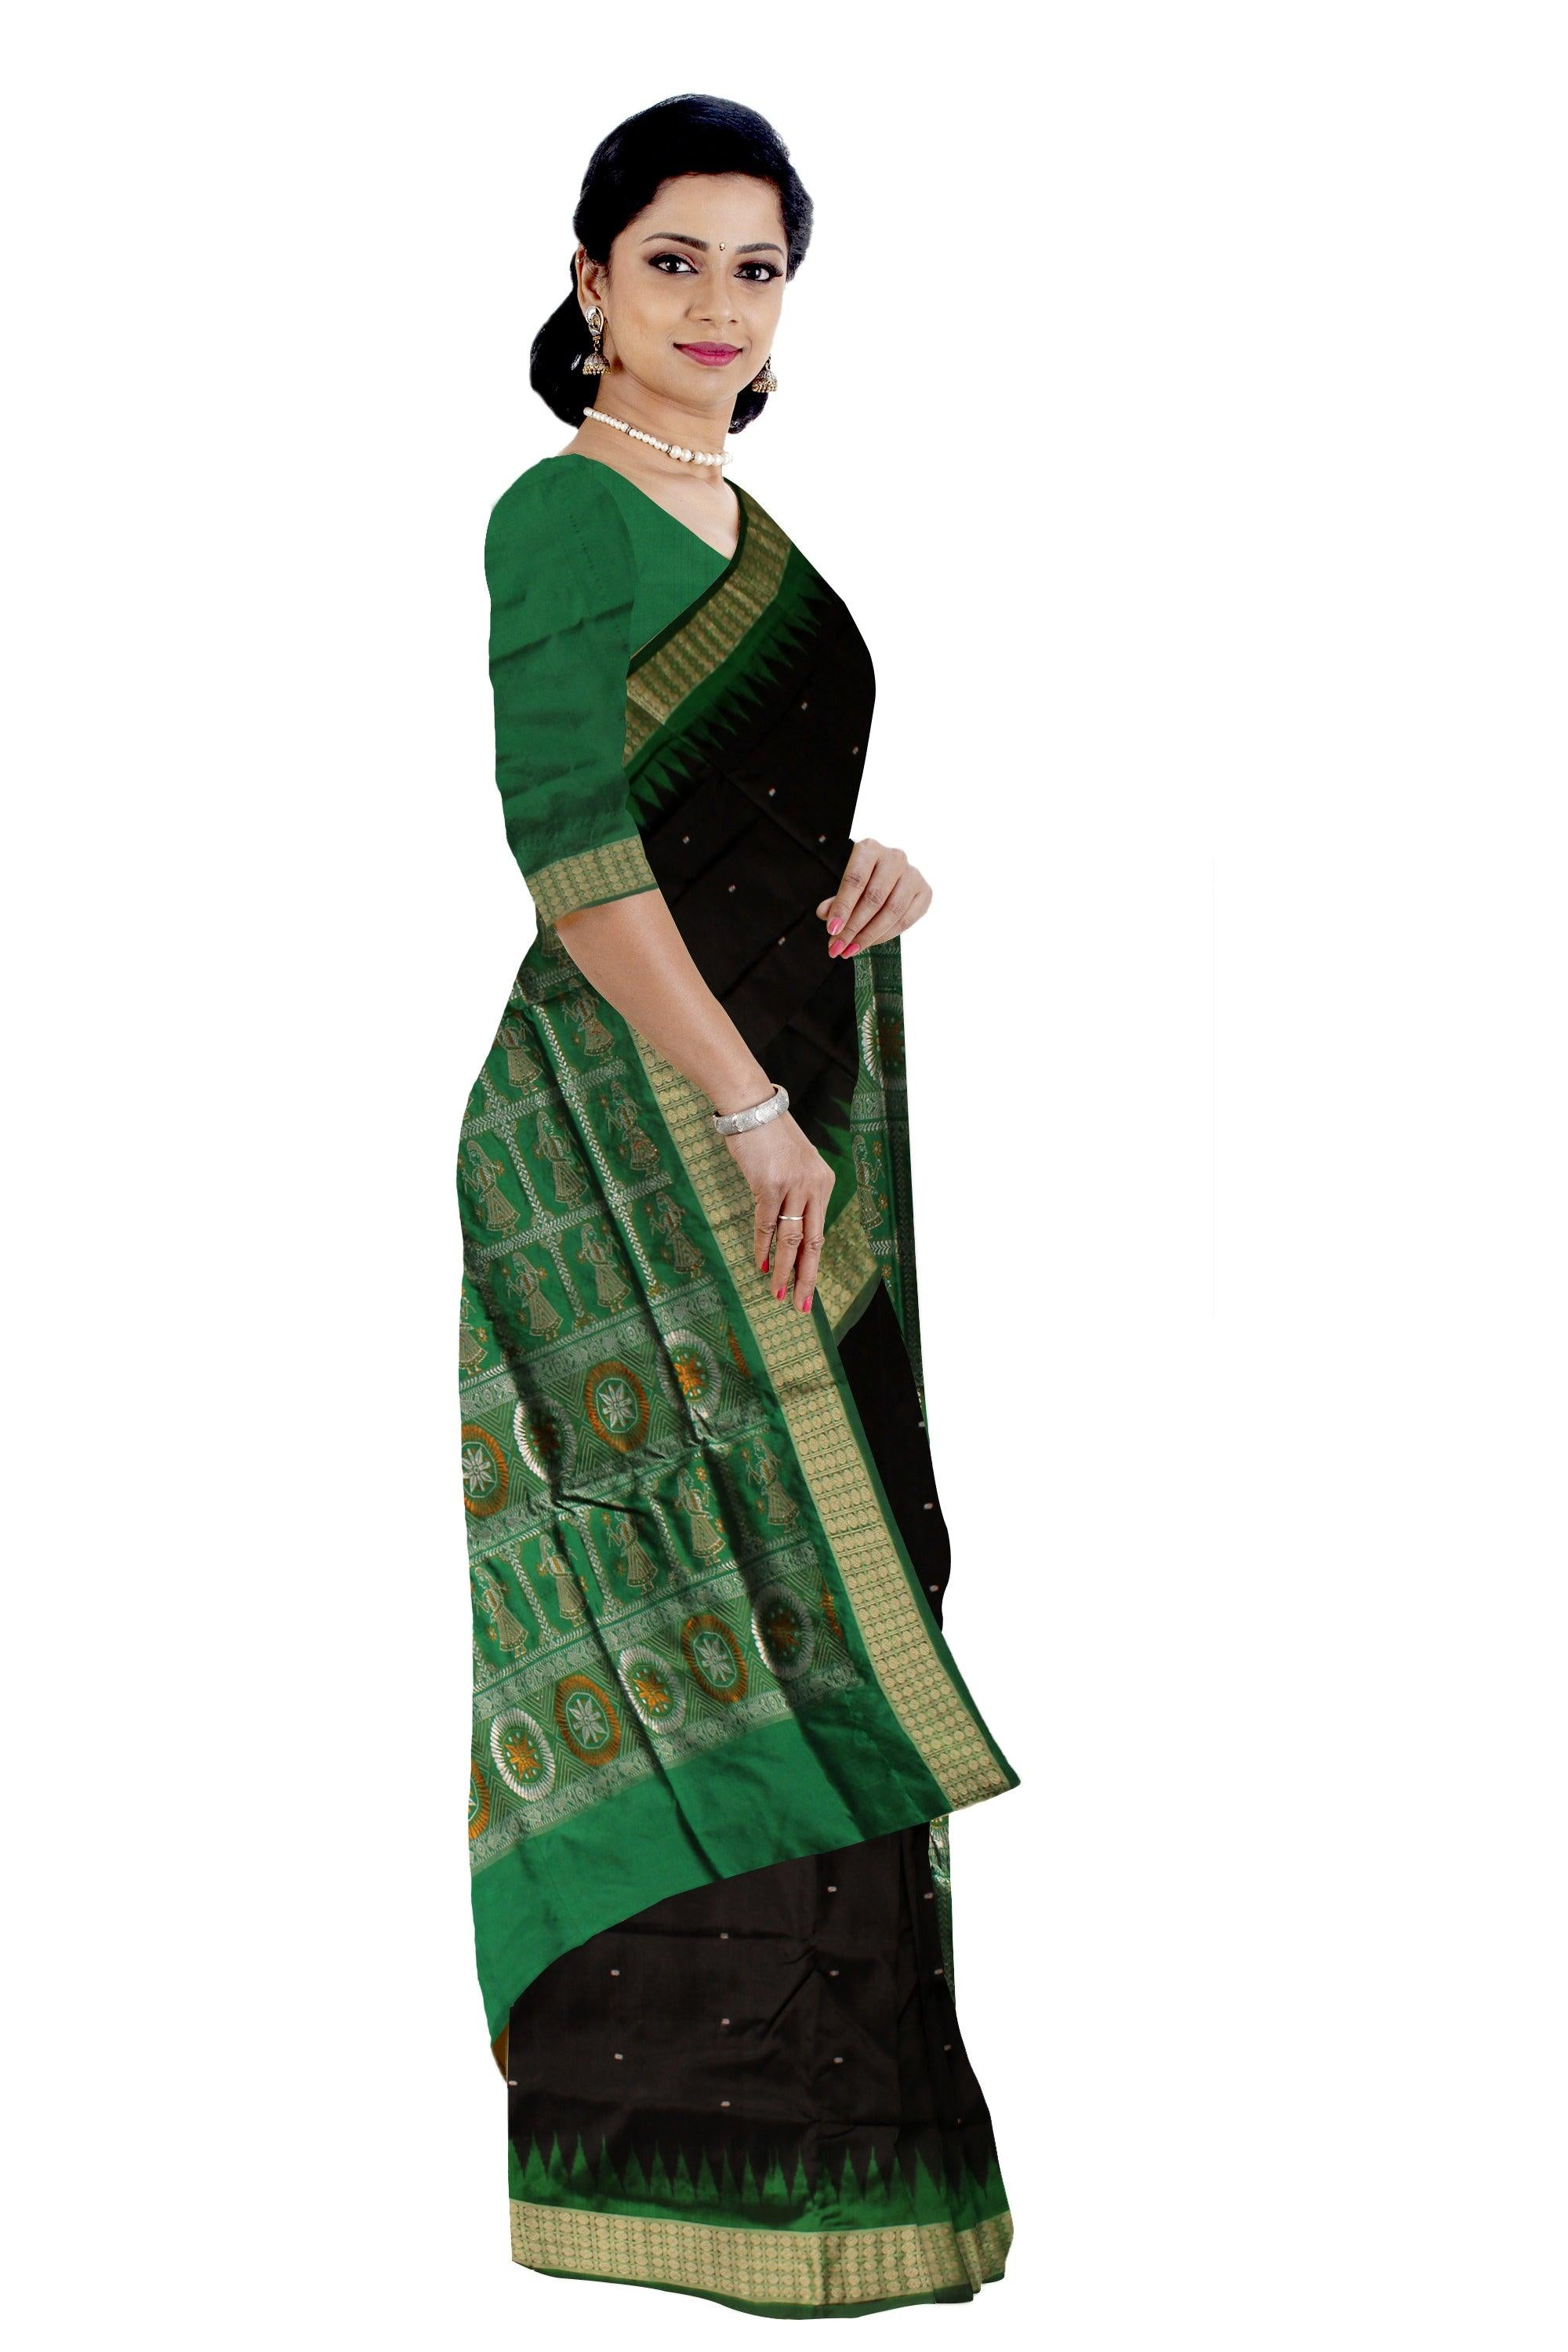 PALLU DOLL PRINT AND BODY BOOTY PATTERN DESIGN IN BLACK  AND GREEN COLOR BASE, ATTACHED WITH BLOUSE. - Koshali Arts & Crafts Enterprise